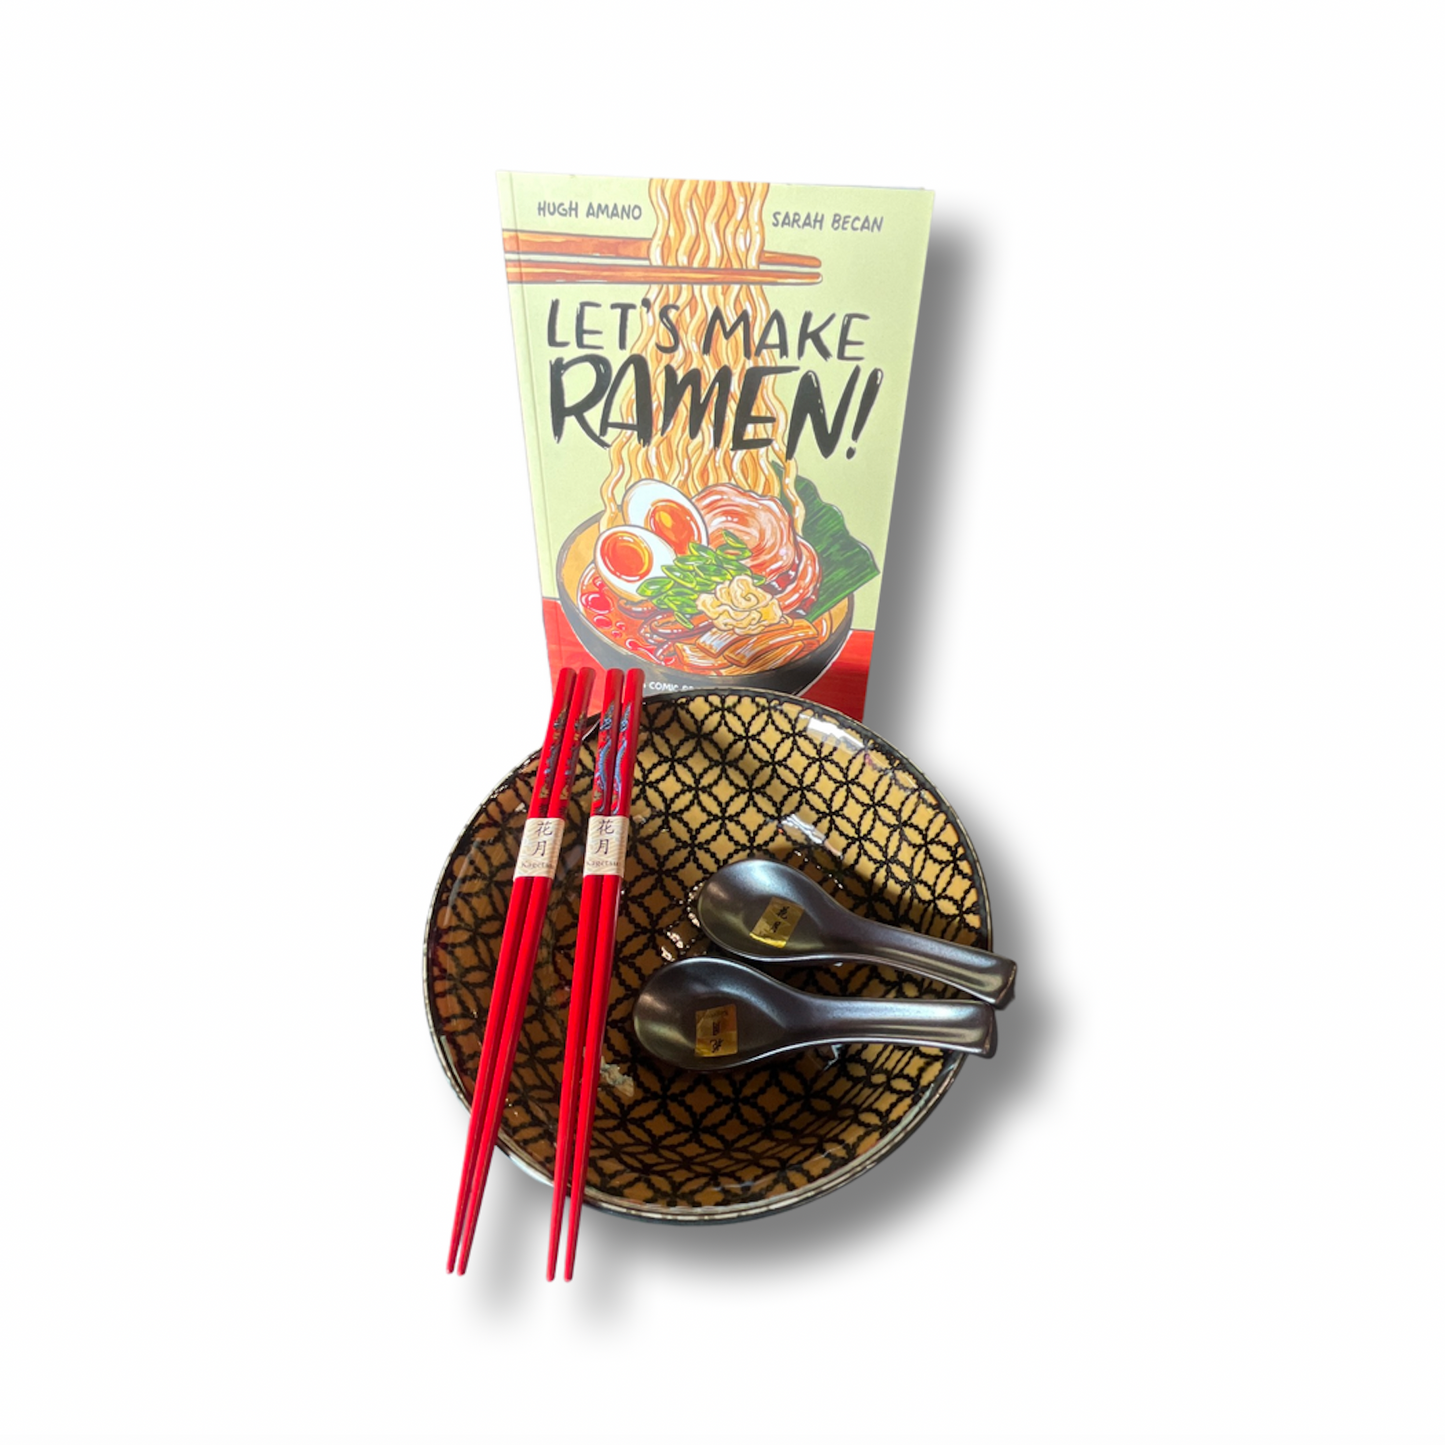 Ramen for Two Gift Set with Let's Make Ramen Comic Book Cookbook